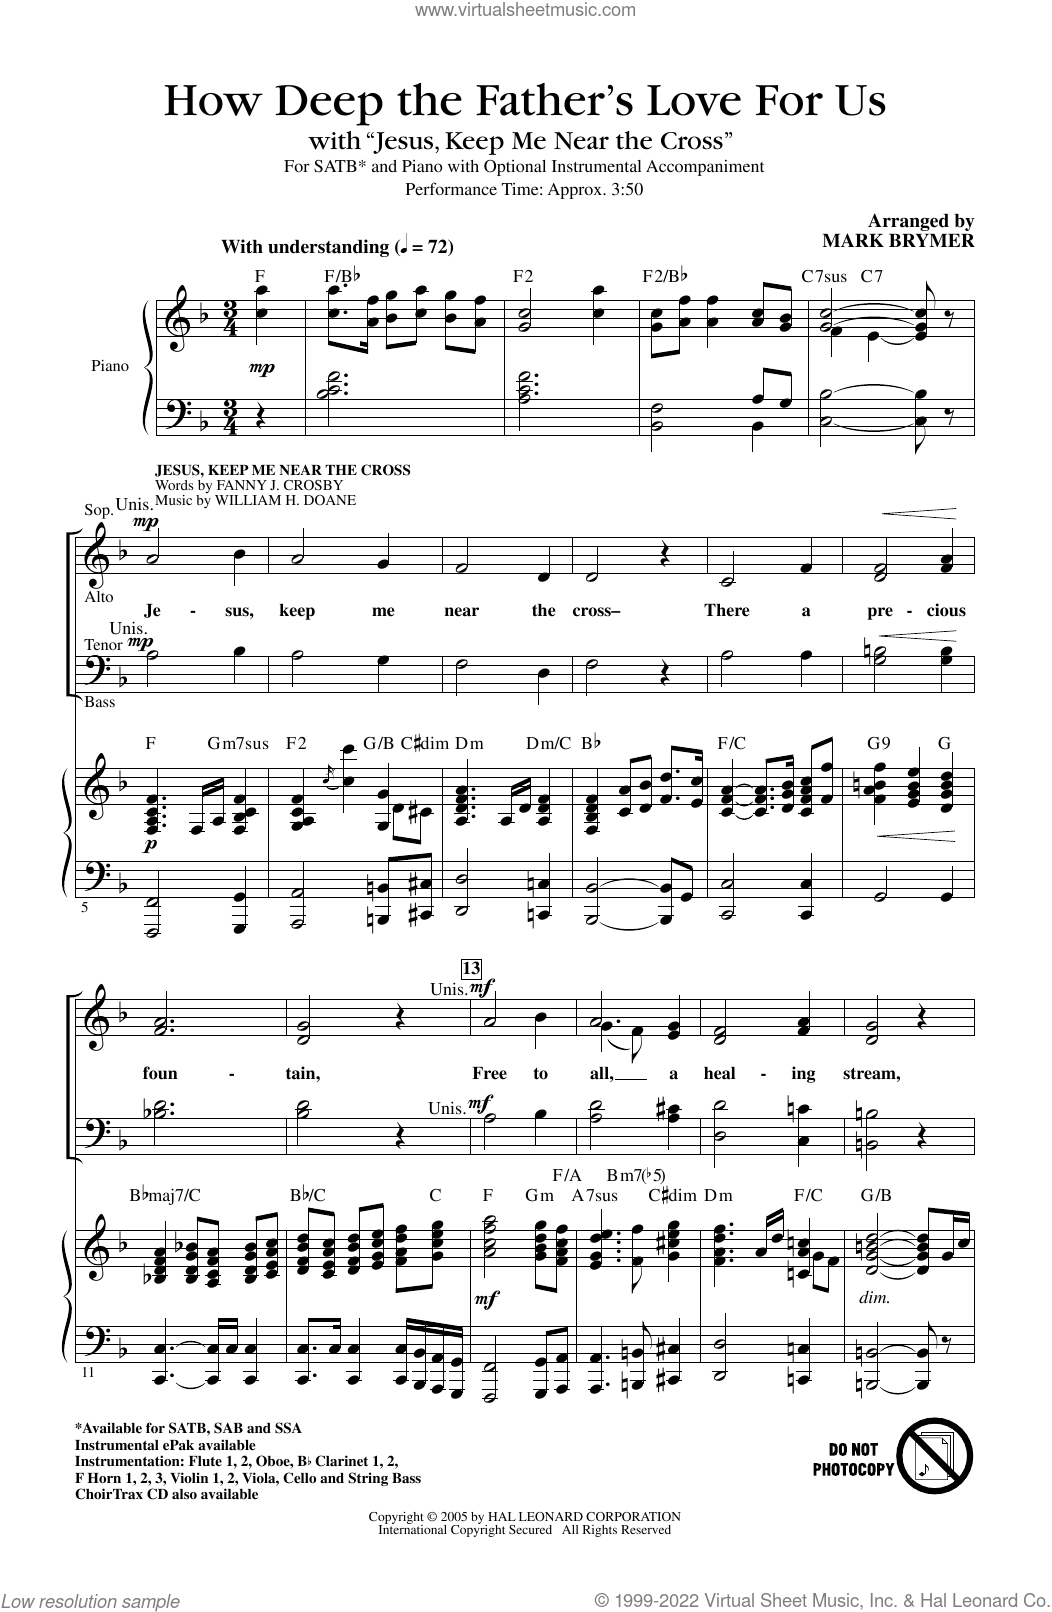 https://cdn3.virtualsheetmusic.com/images/first_pages/HL/HL-1095316First_BIG.png